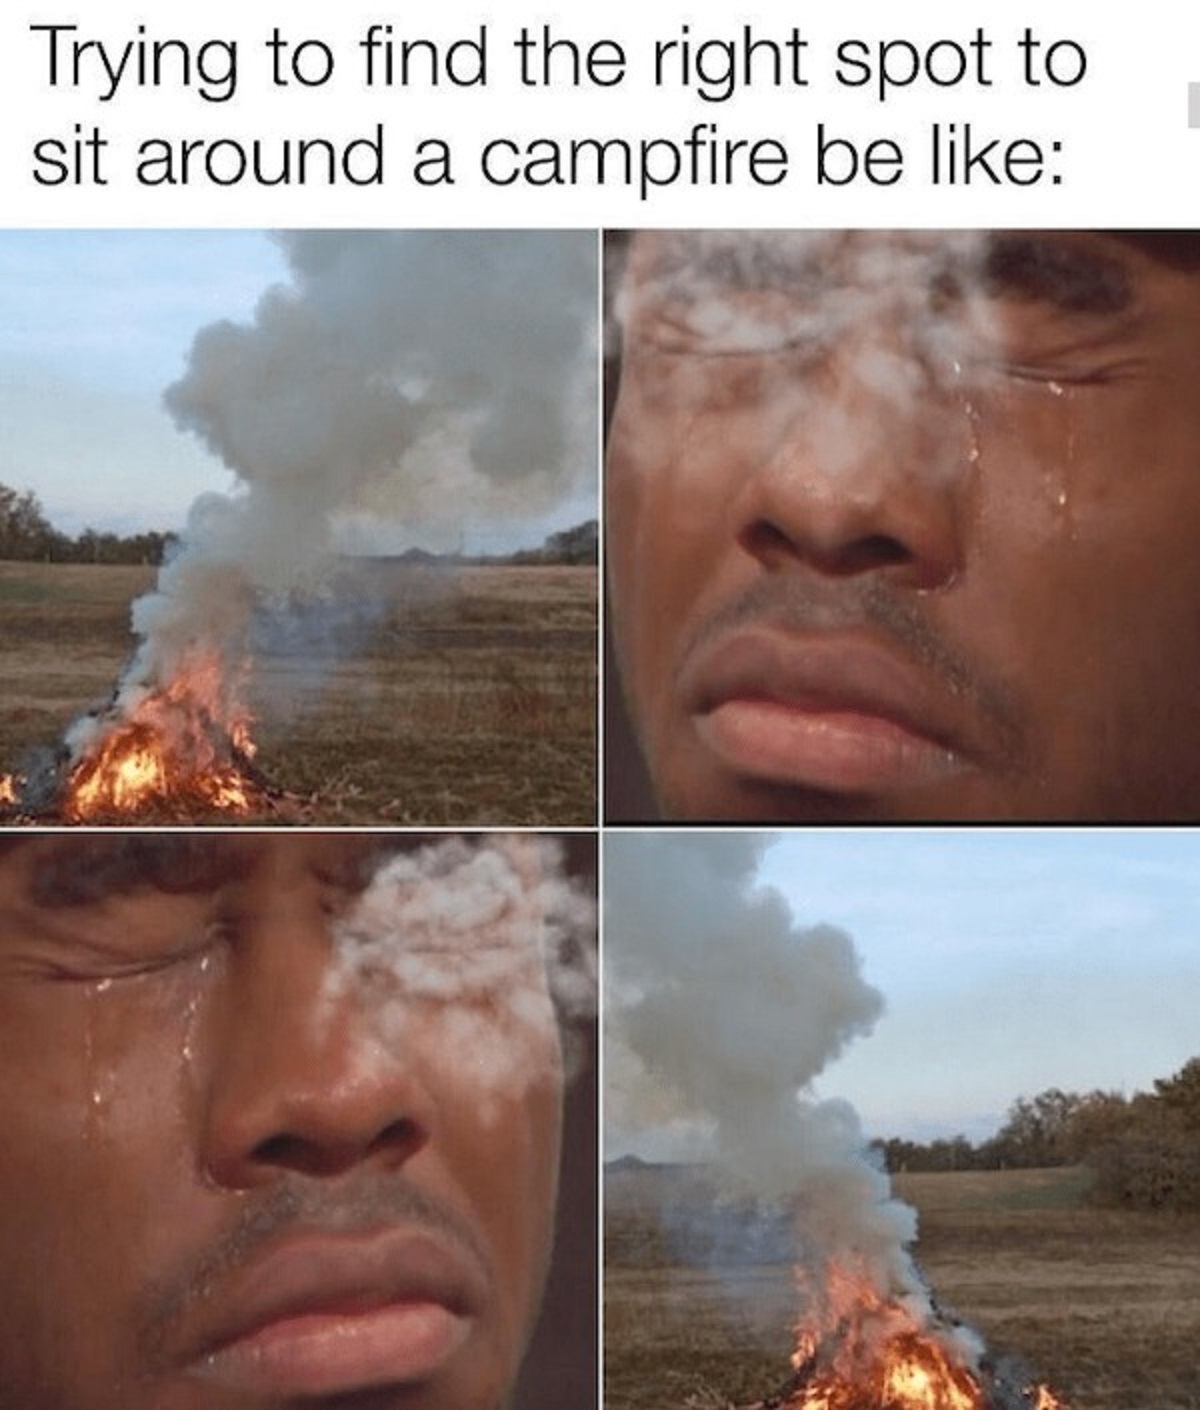 trying to find the right spot to sit around a campfire be like - Trying to find the right spot to sit around a campfire be